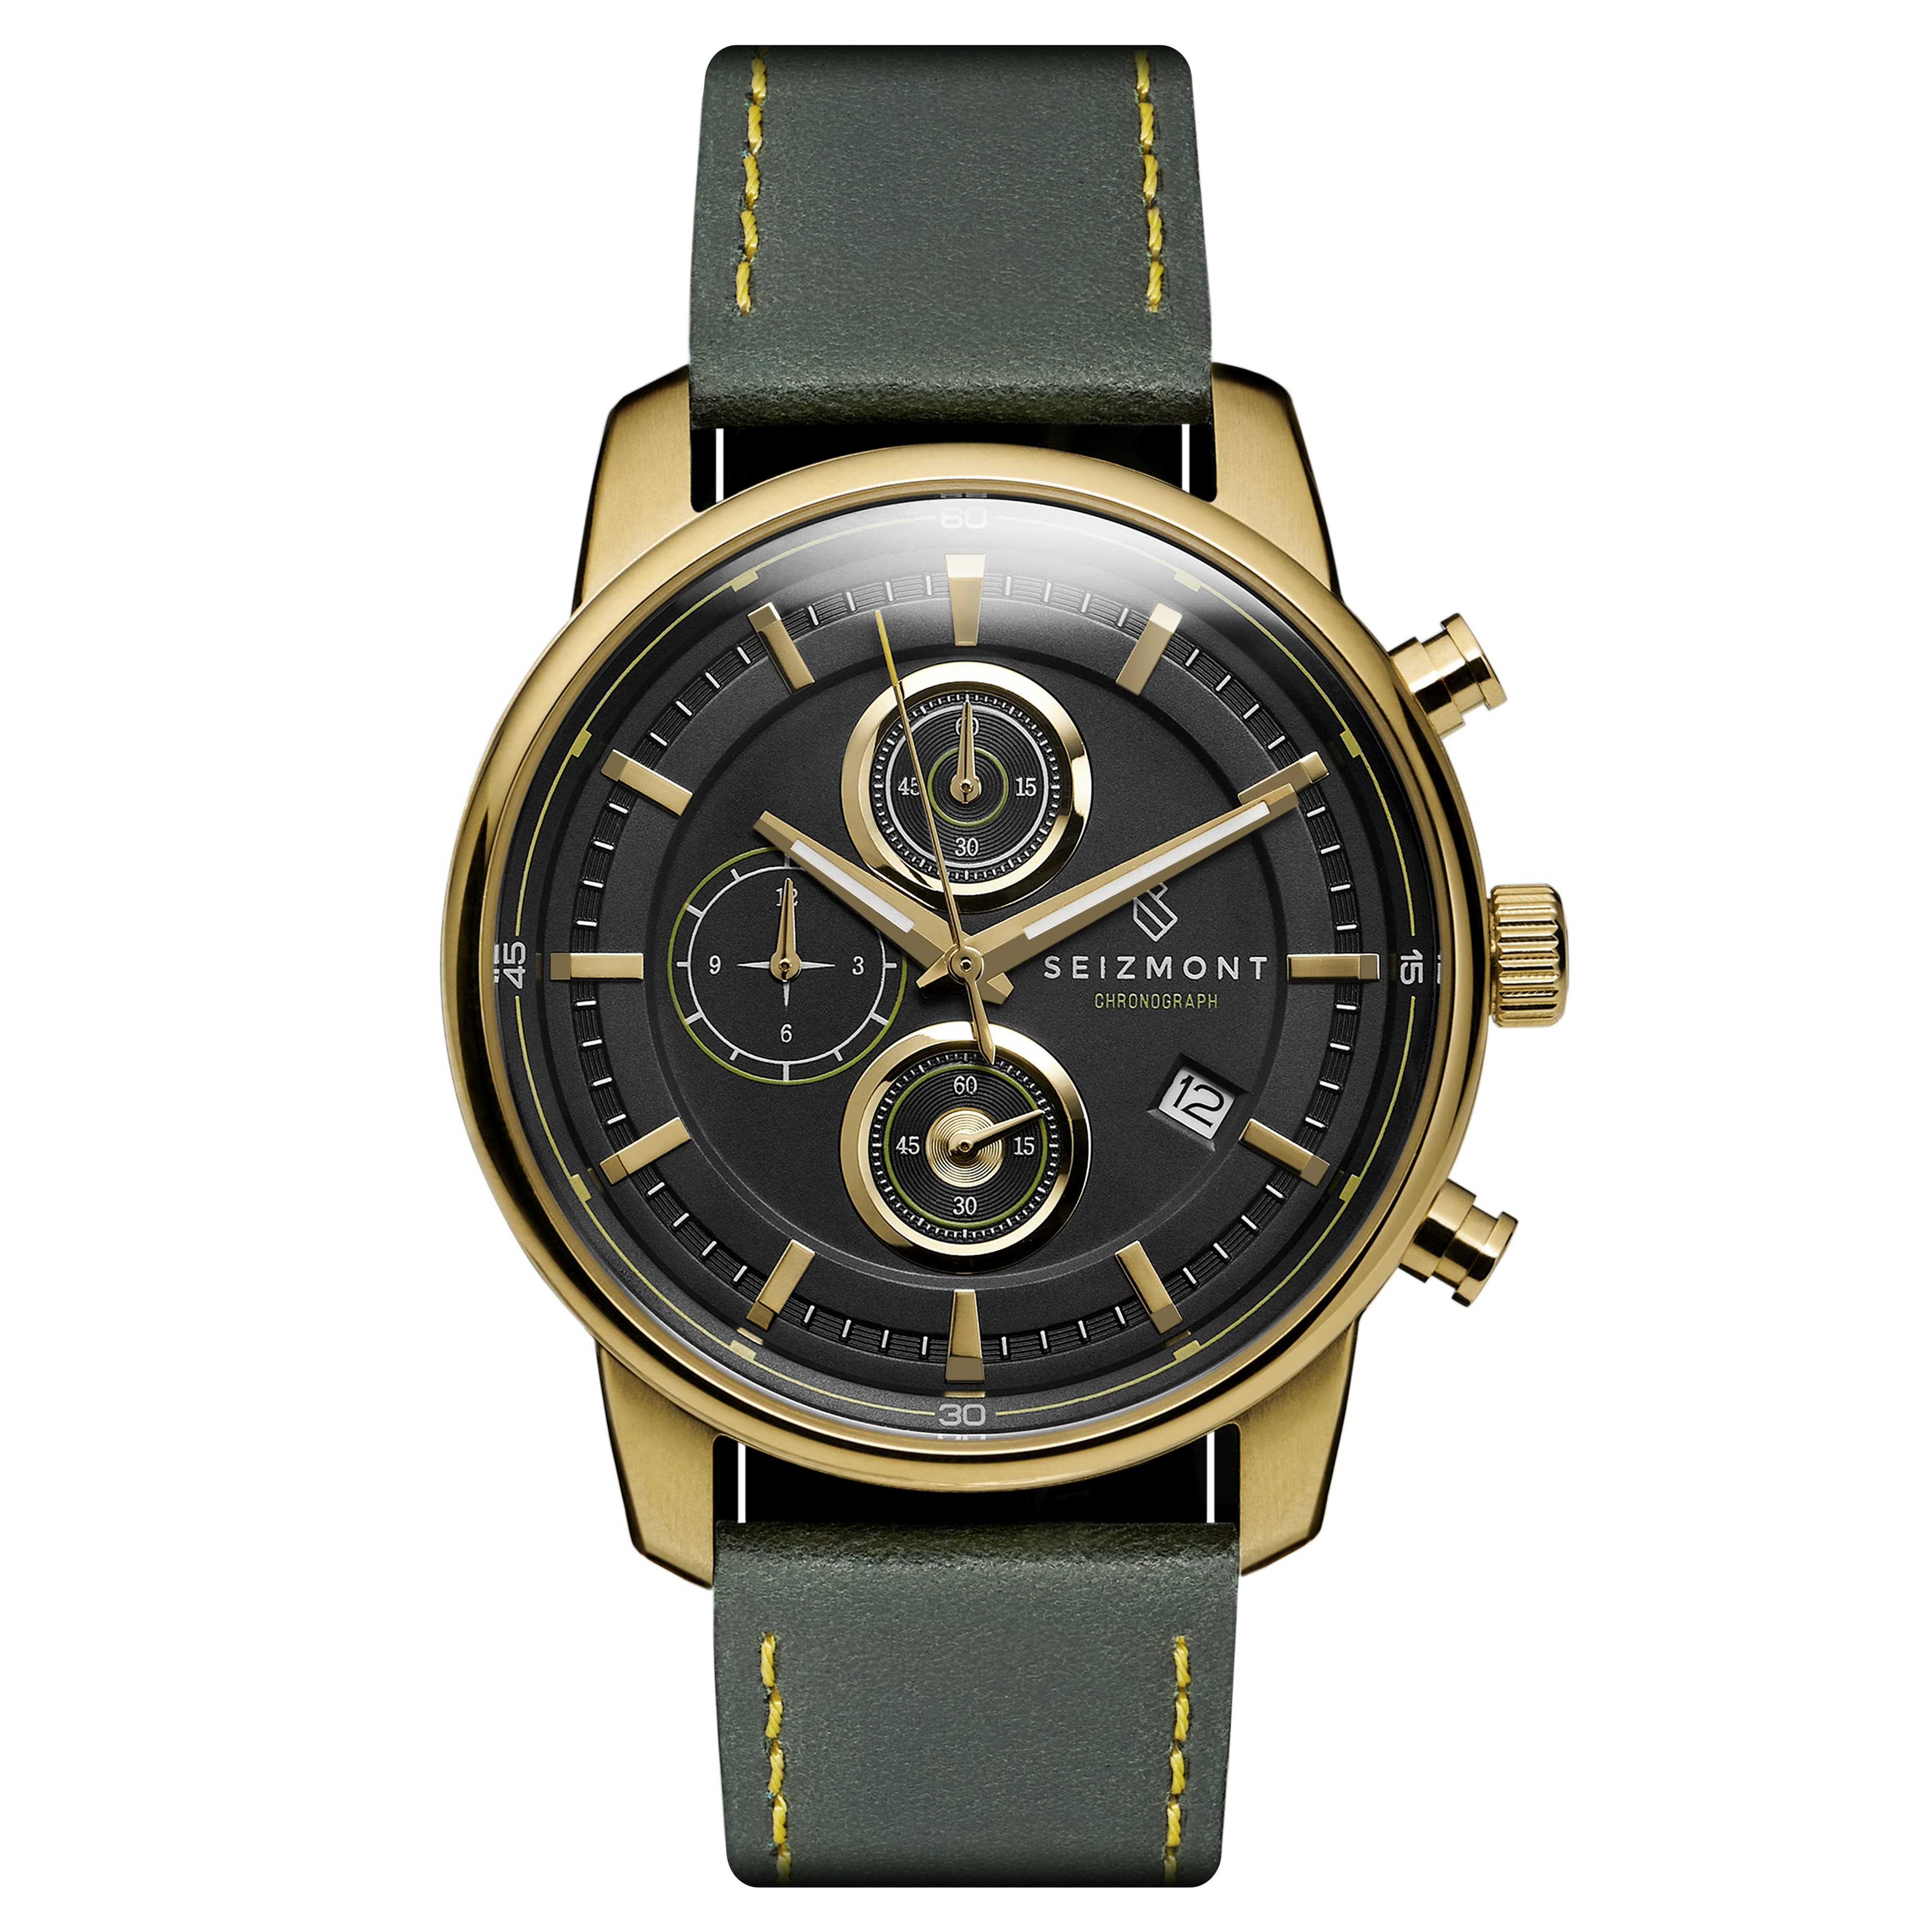 With & In Dial Green | stock! Gold-Tone | Chronograph Black | Parva Leather Seizmont Strap Watch